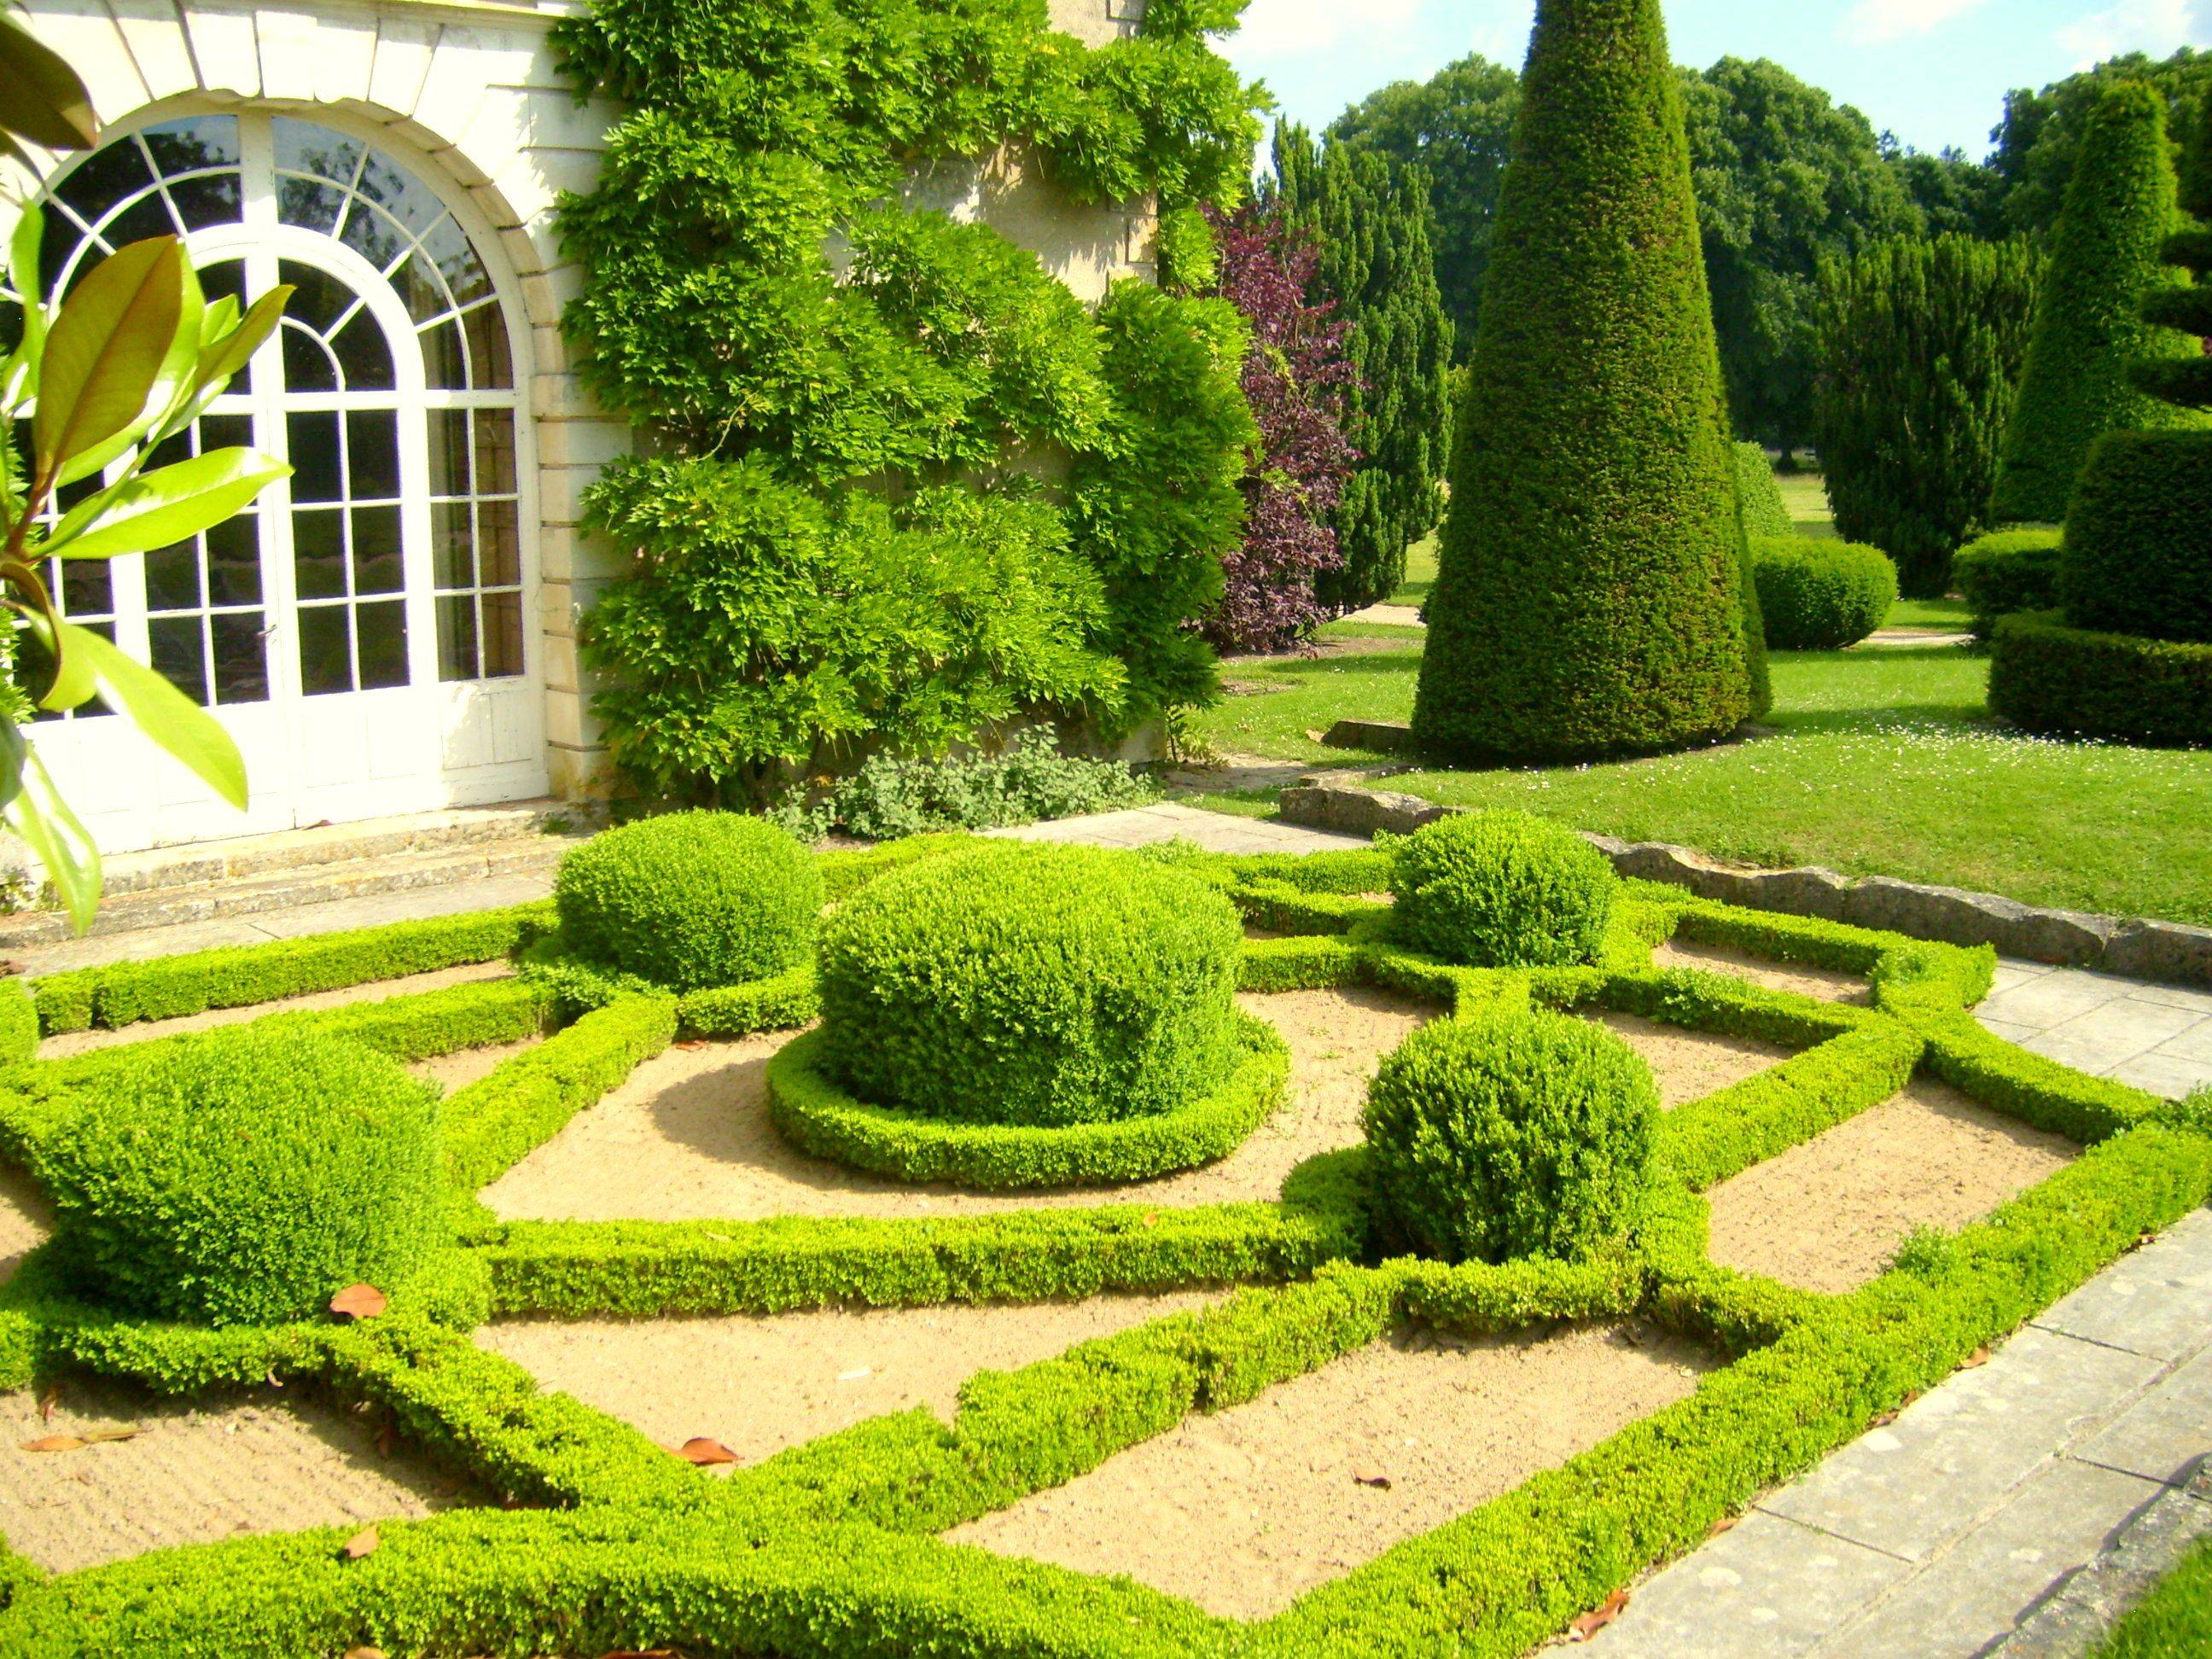 French Chateau Gardens